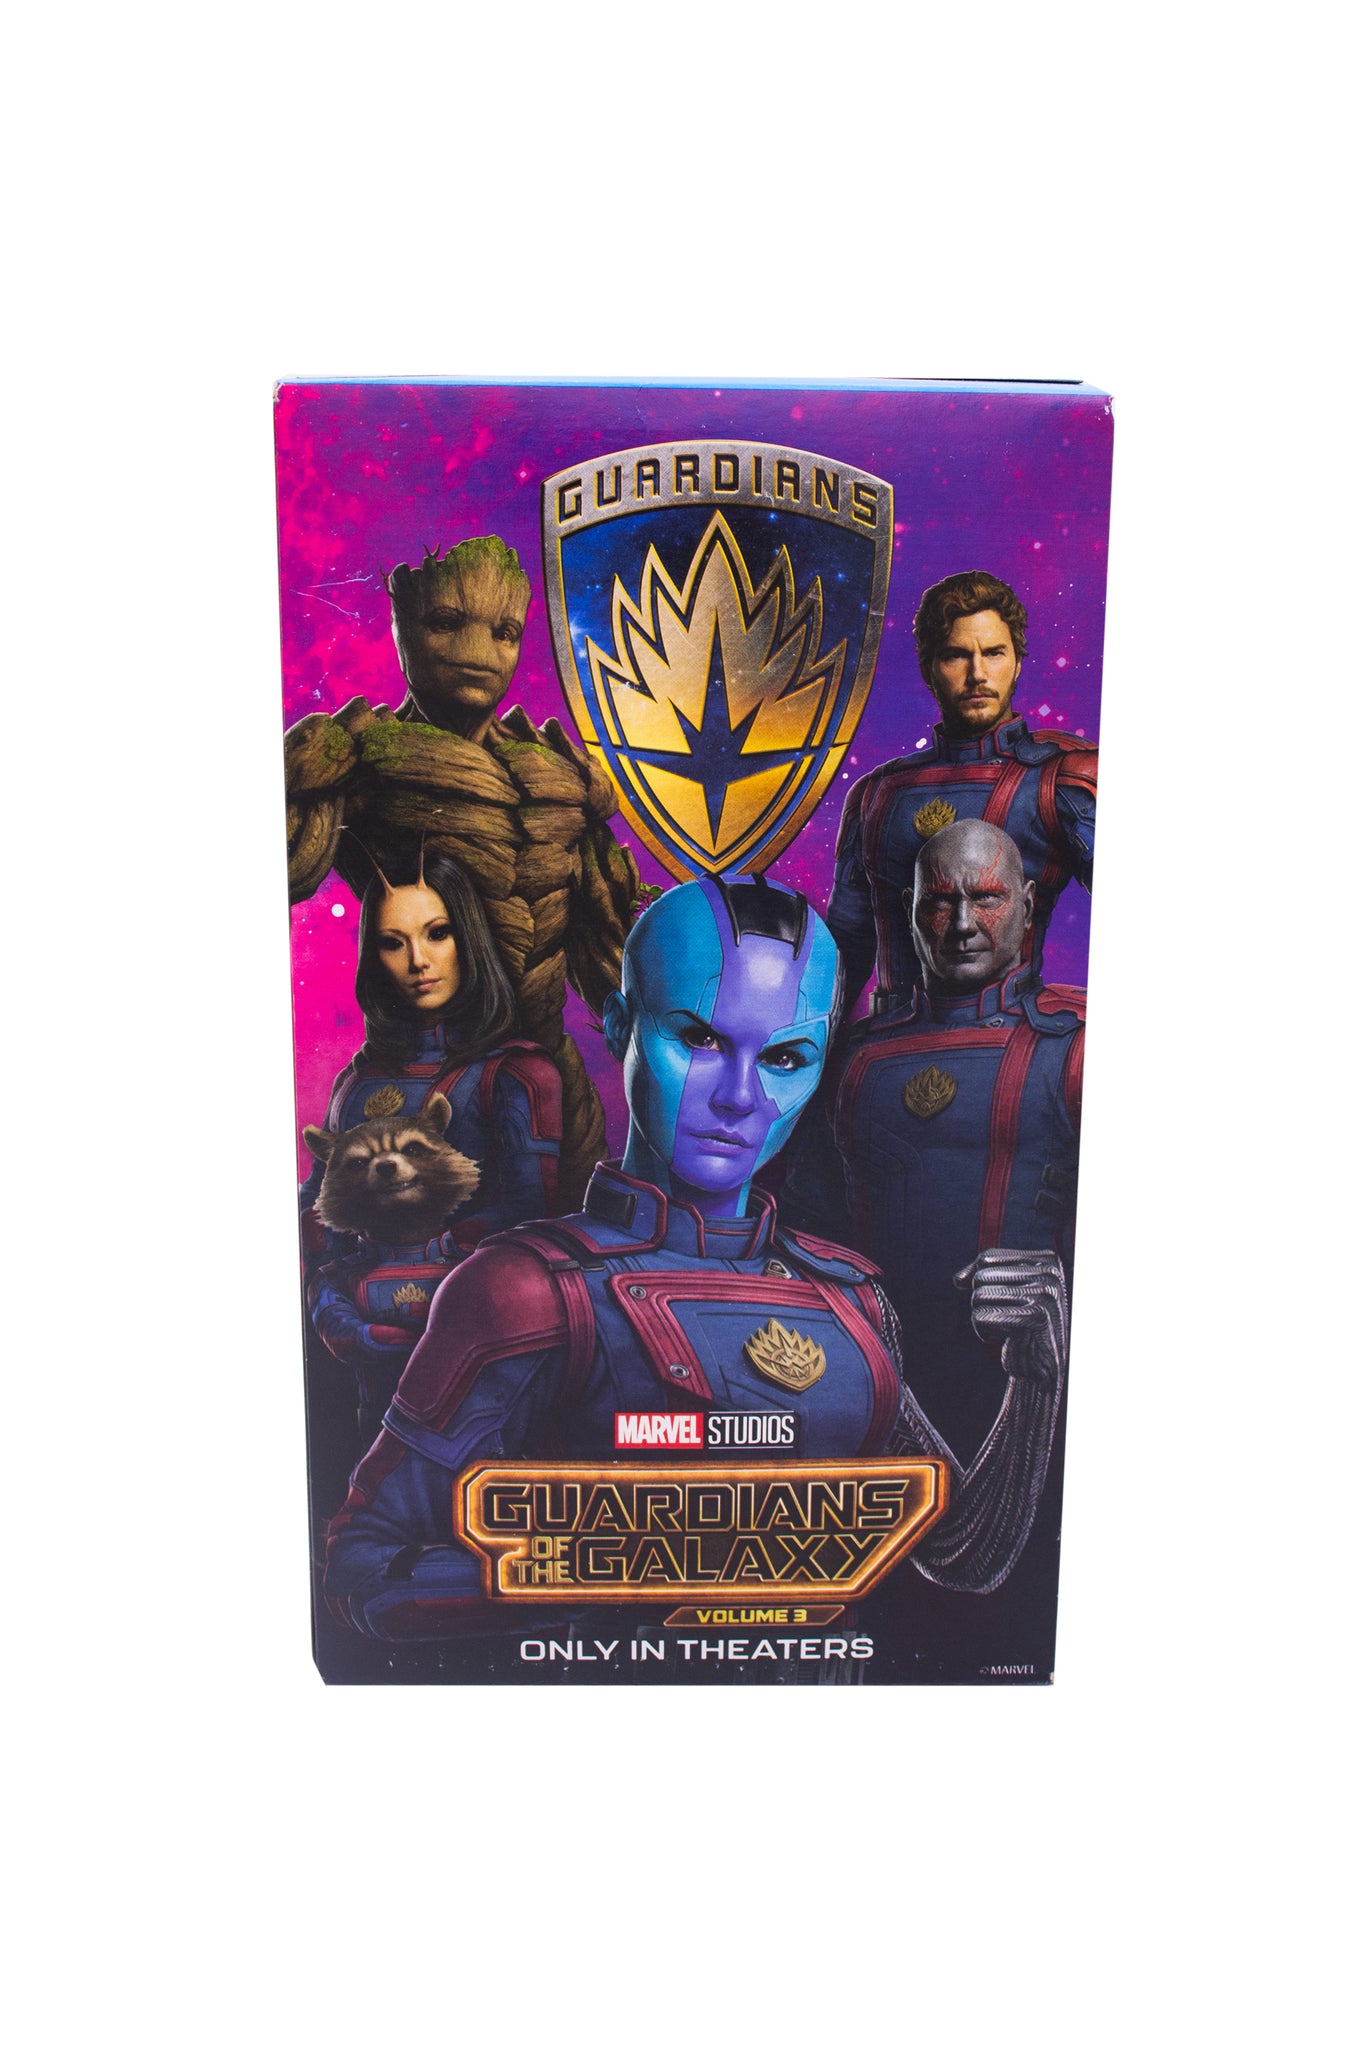 Cookie Crisp Whole Grain Cereal, Guardians of the Galaxy Vol. 3 Special Edition, Family Size, 518g